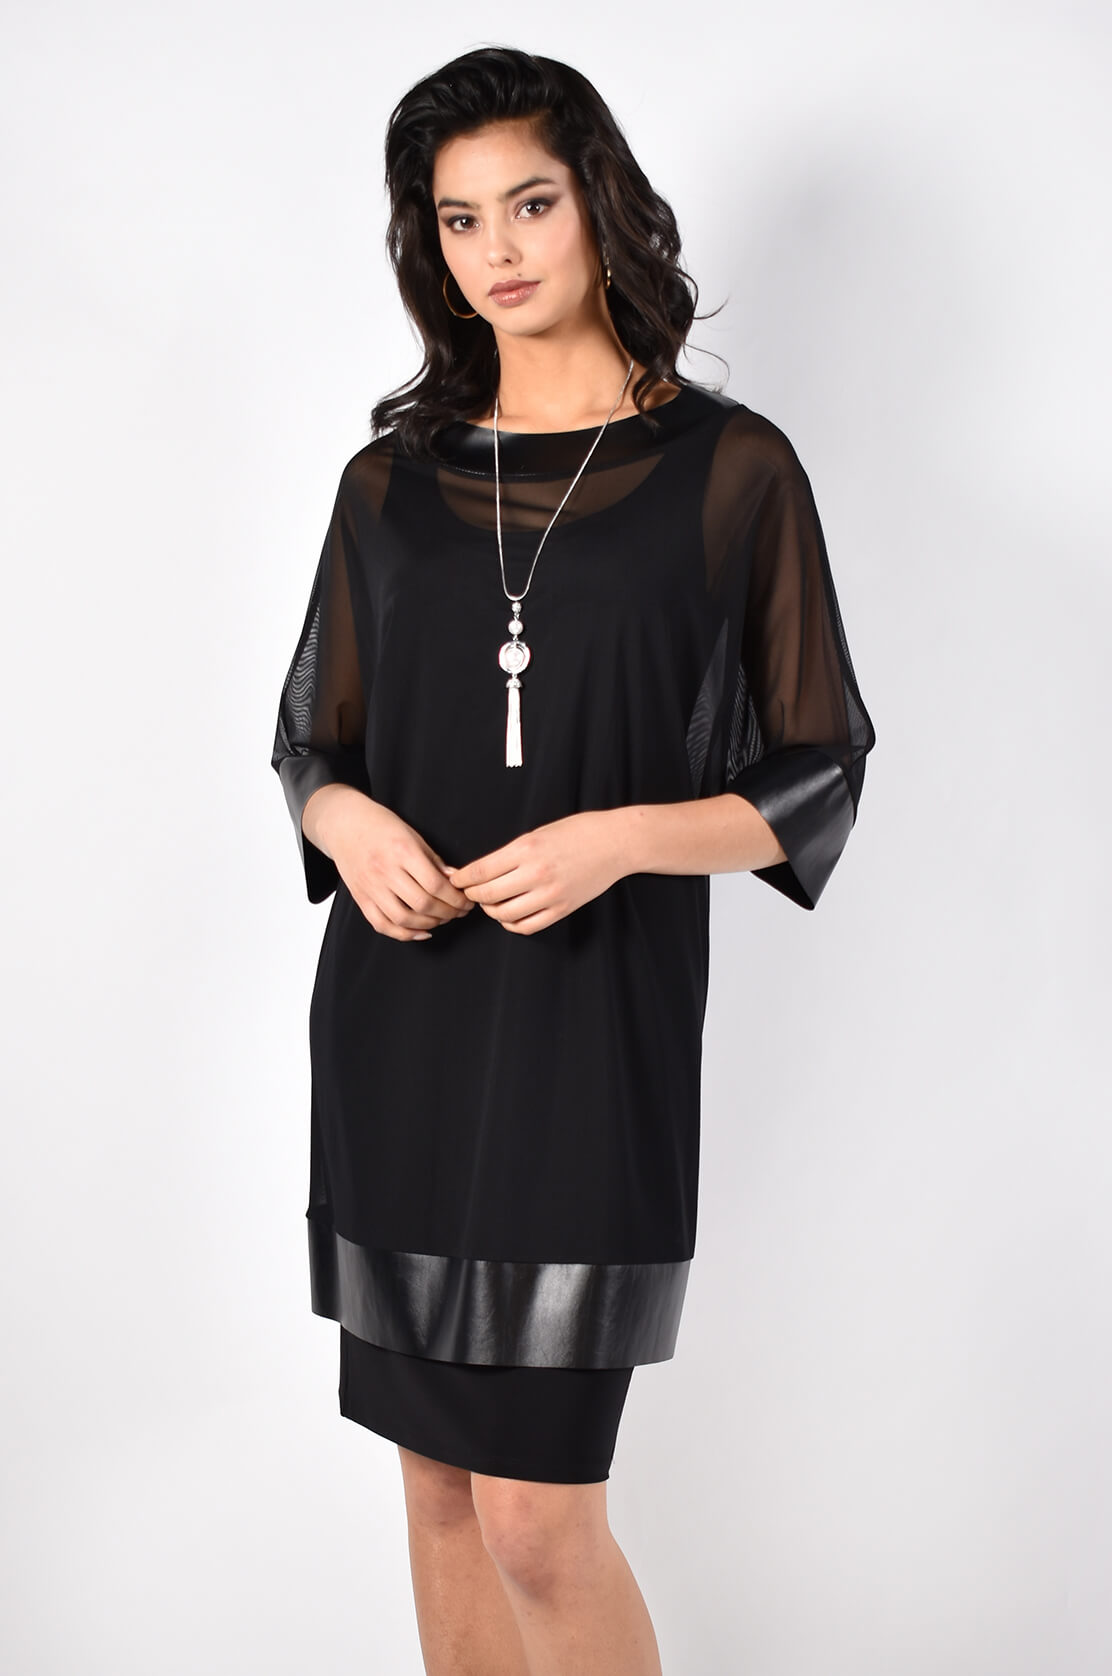 Satin & Chiffon Overlay Top/Dress 213435 - After Hours Boutique